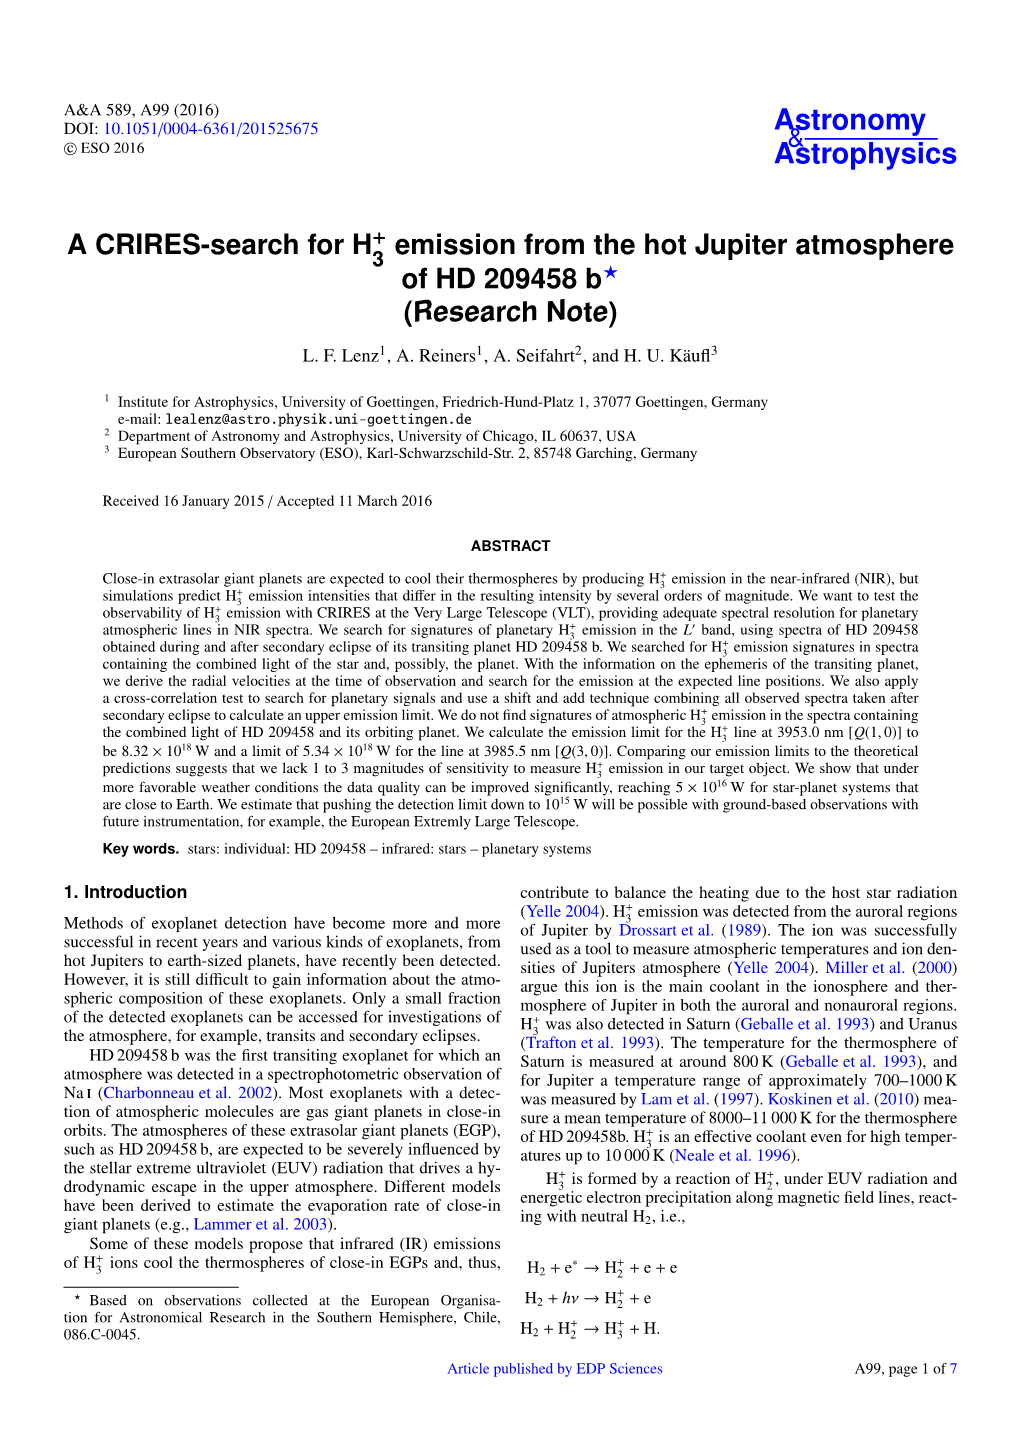 A CRIRES-Search for H3+ Emission from the Hot Jupiter Atmosphere Of